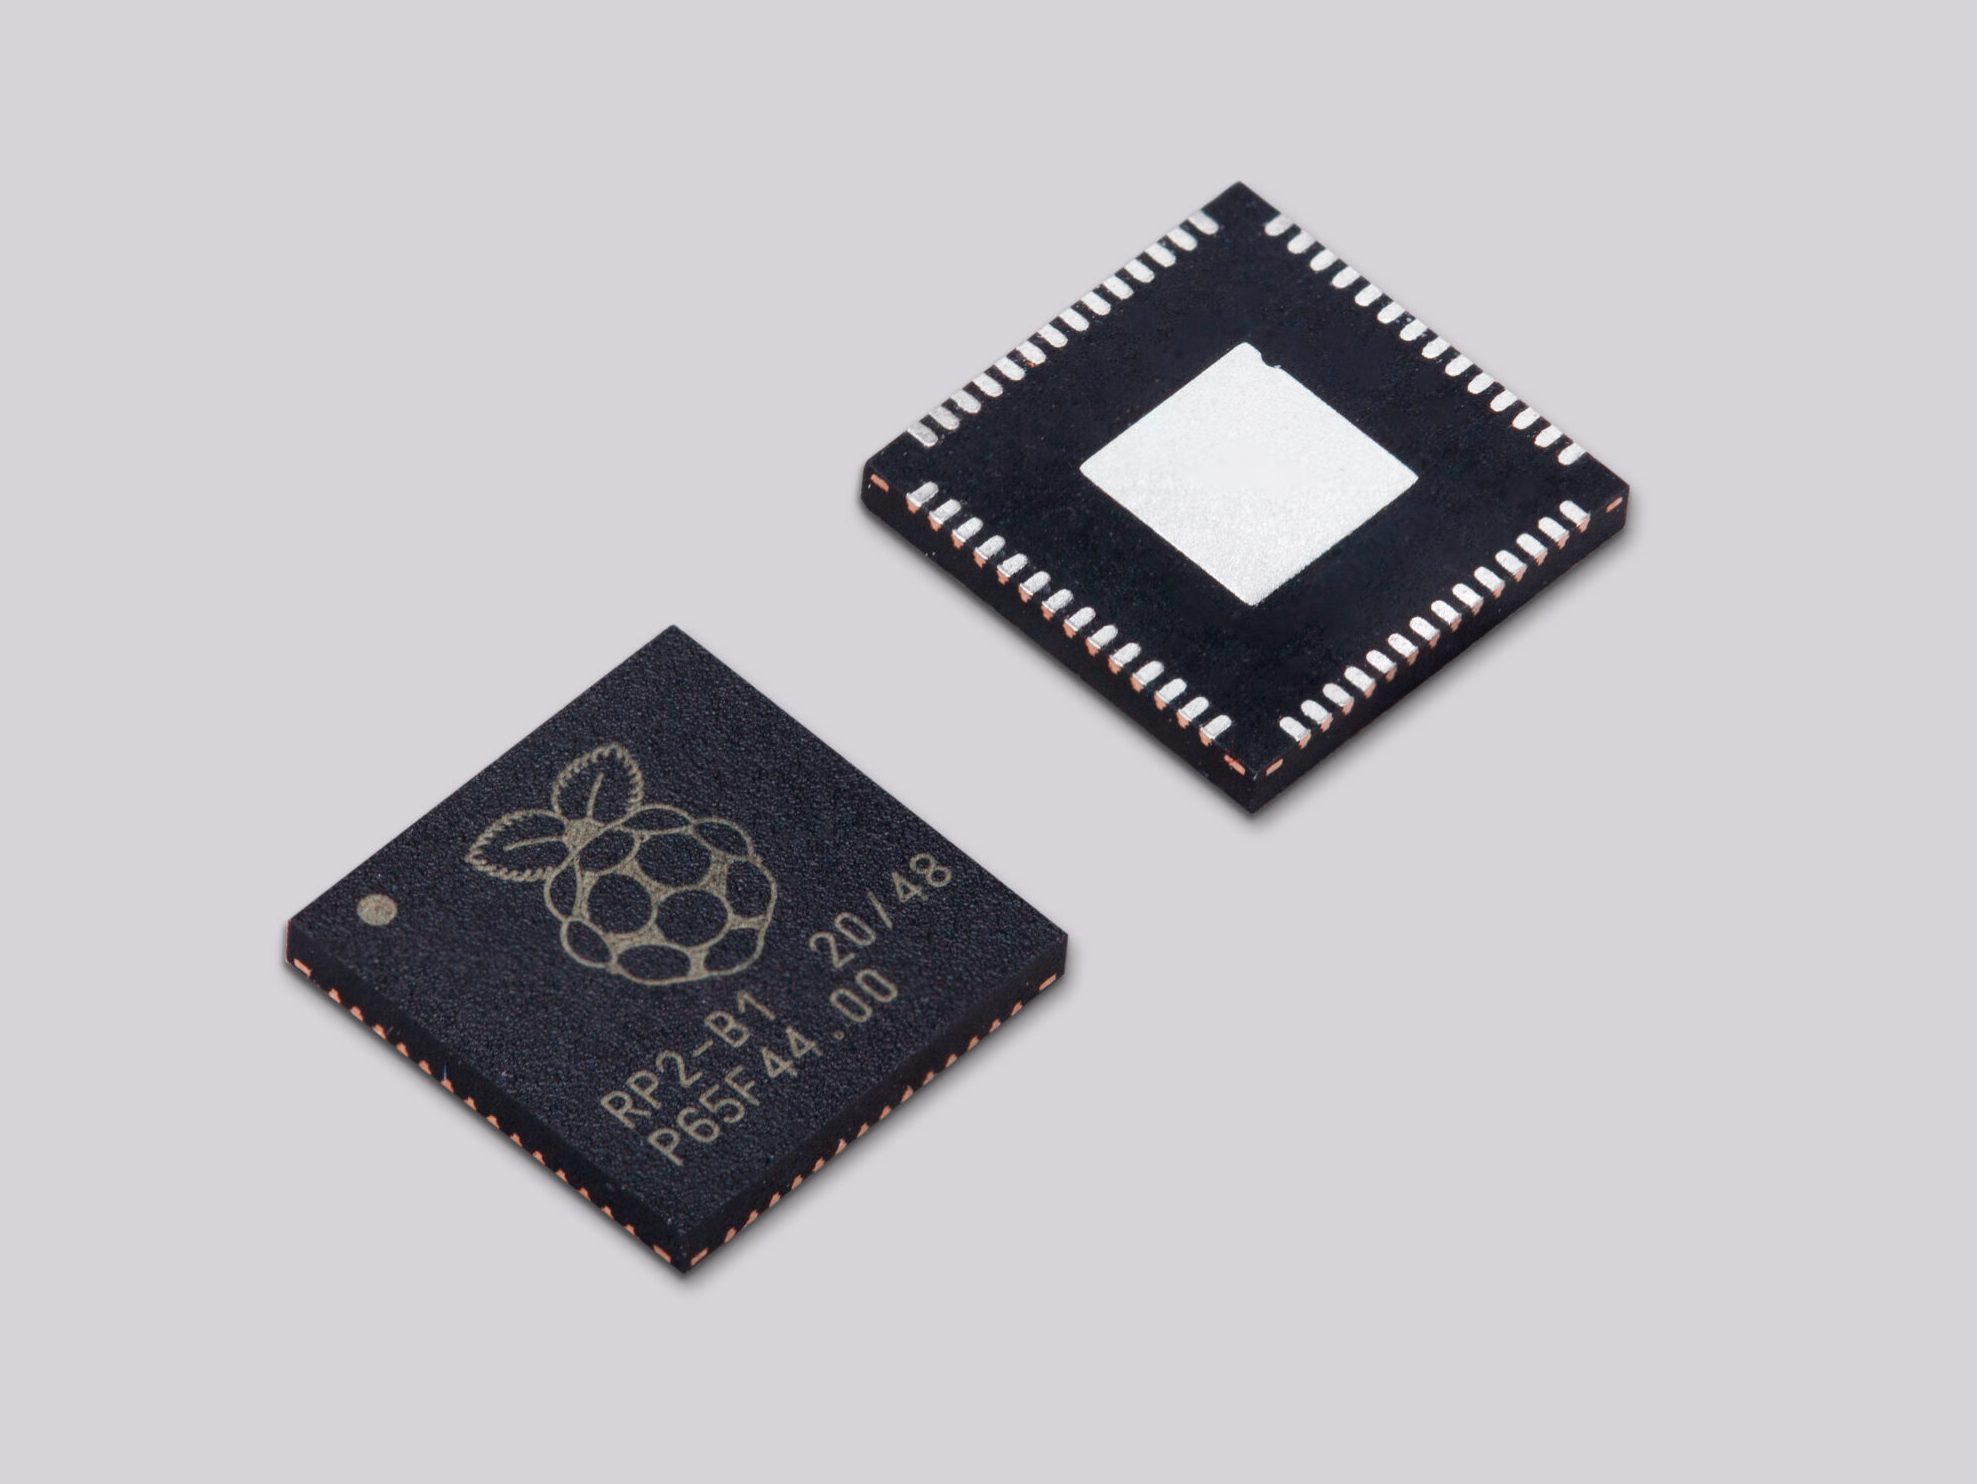 Bulk RP2040 chips now available direct from Raspberry Pi